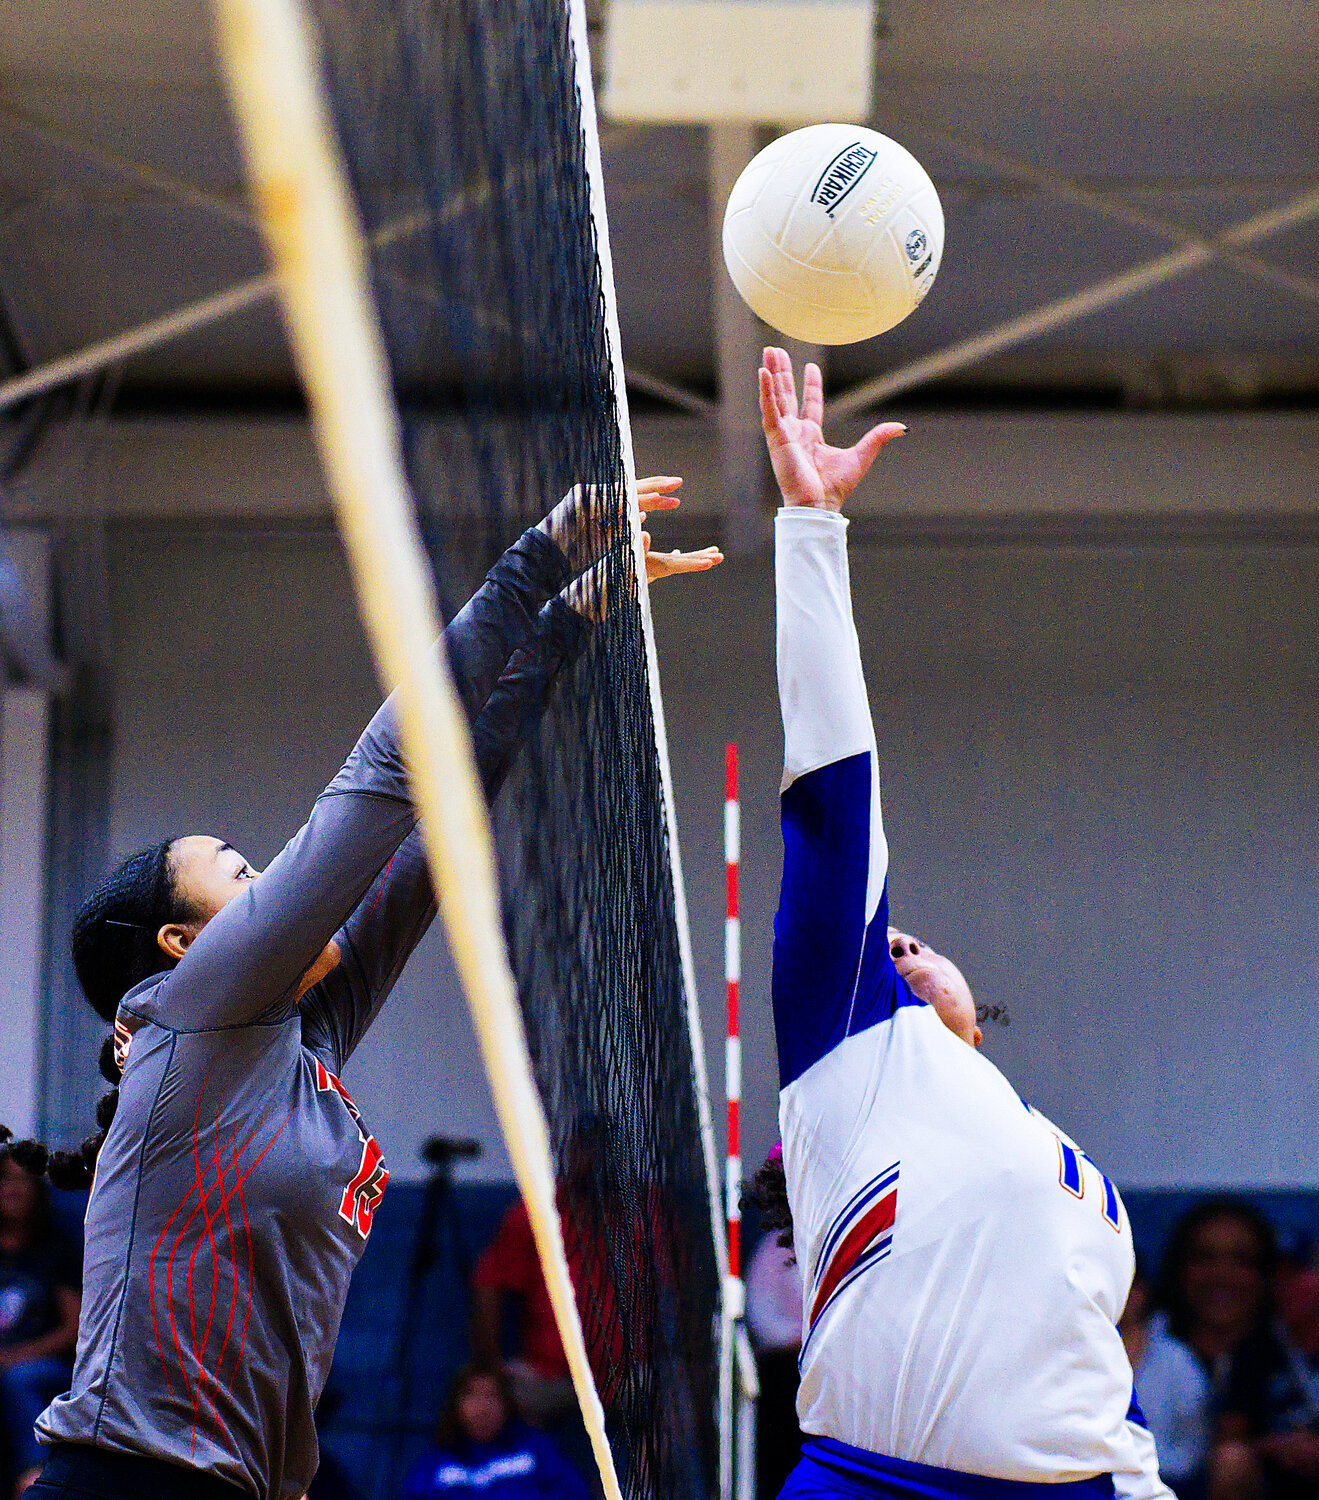 Kyra Jackson of Mineola and Ashley Davis of Quitman reach to control the ball at the net. [view more volleyball]